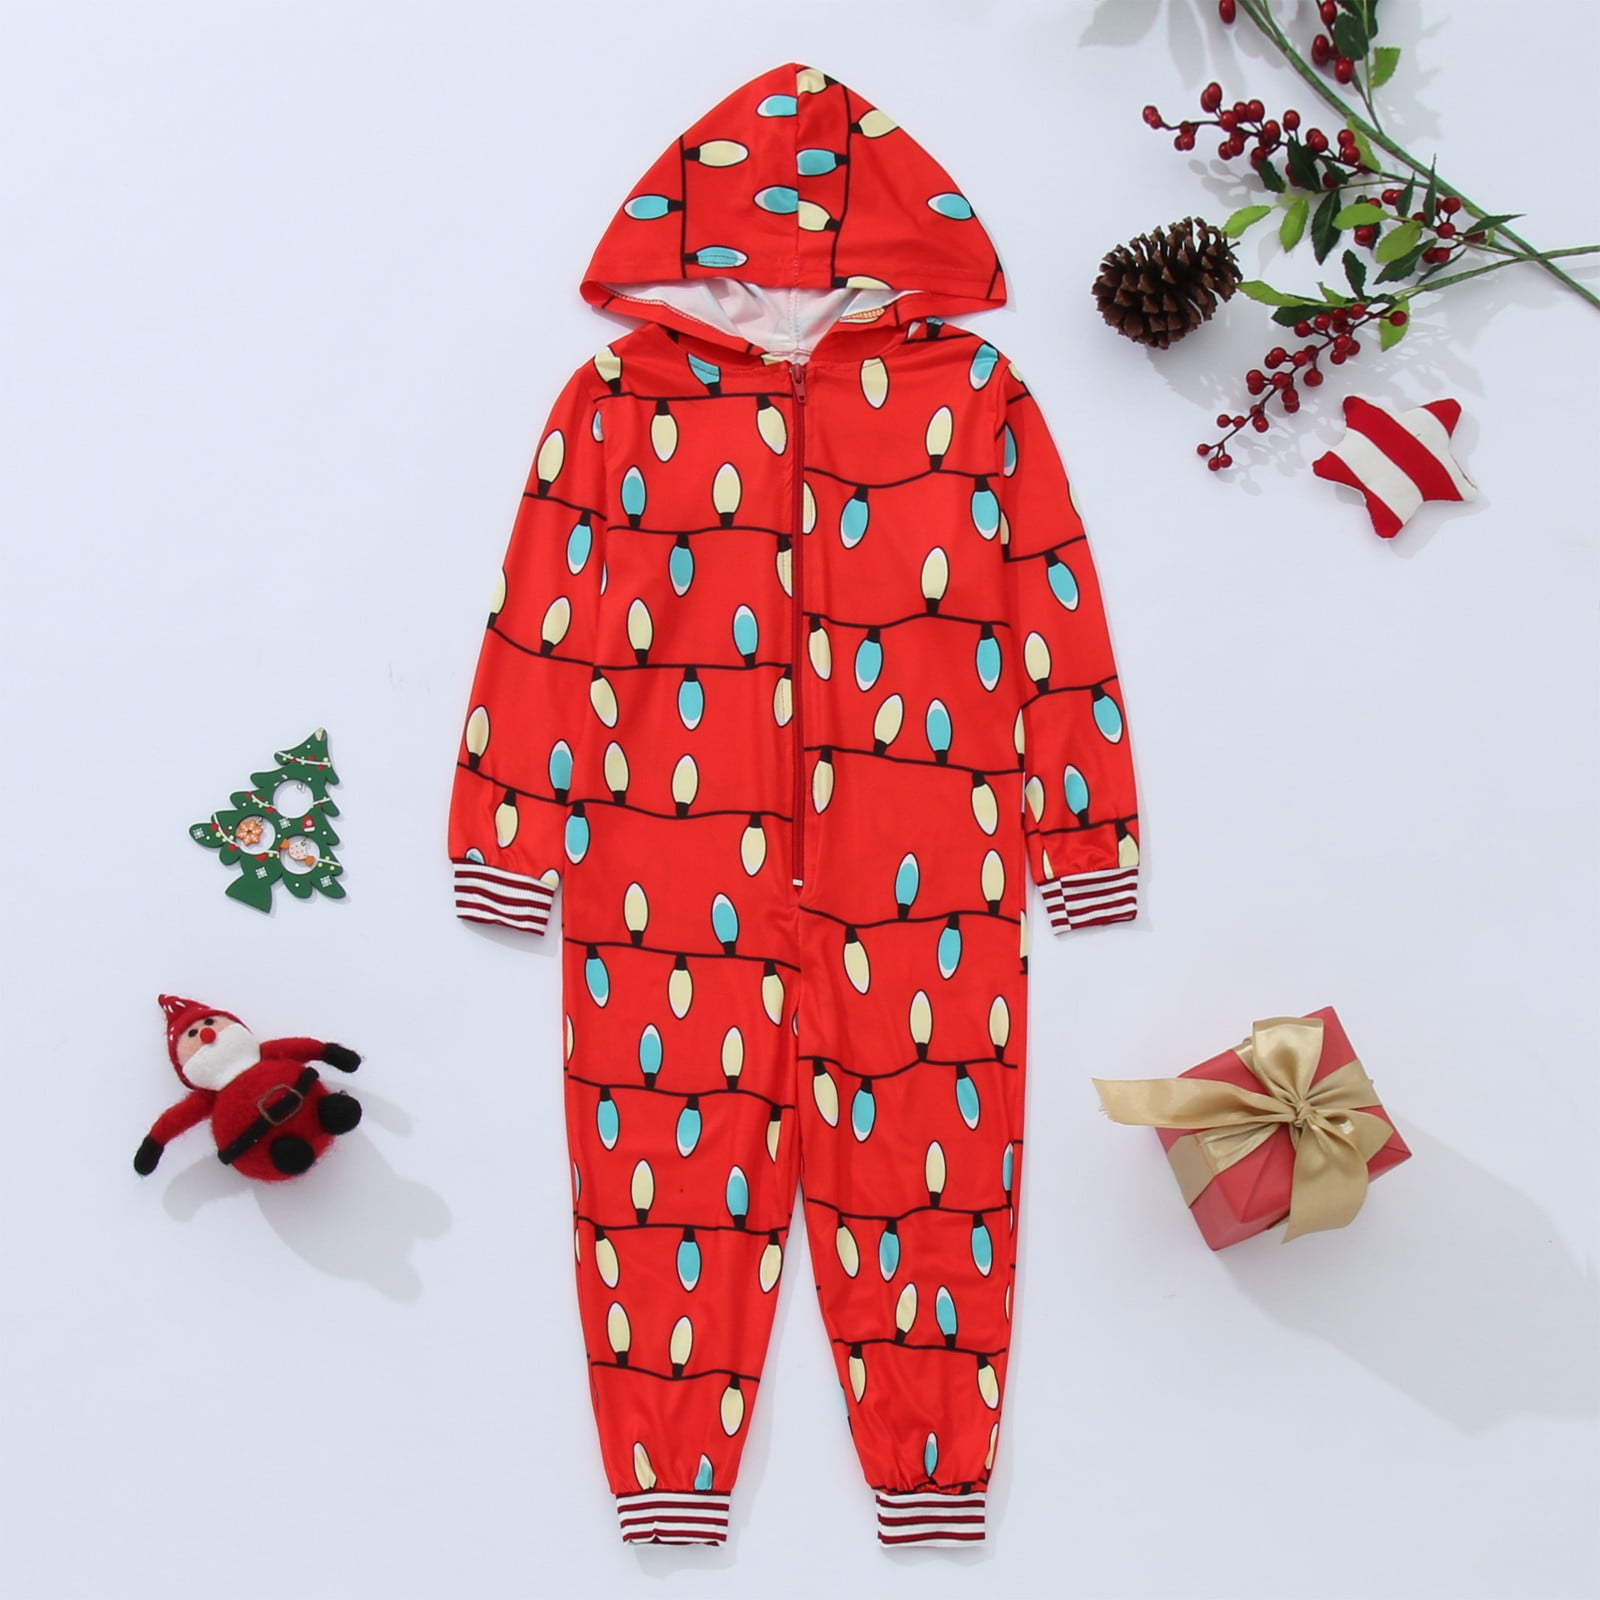 Child Kids Hood Romper Jumpsuit Family Sleepwear Christmas Matching Outfit Red - Walmart.com